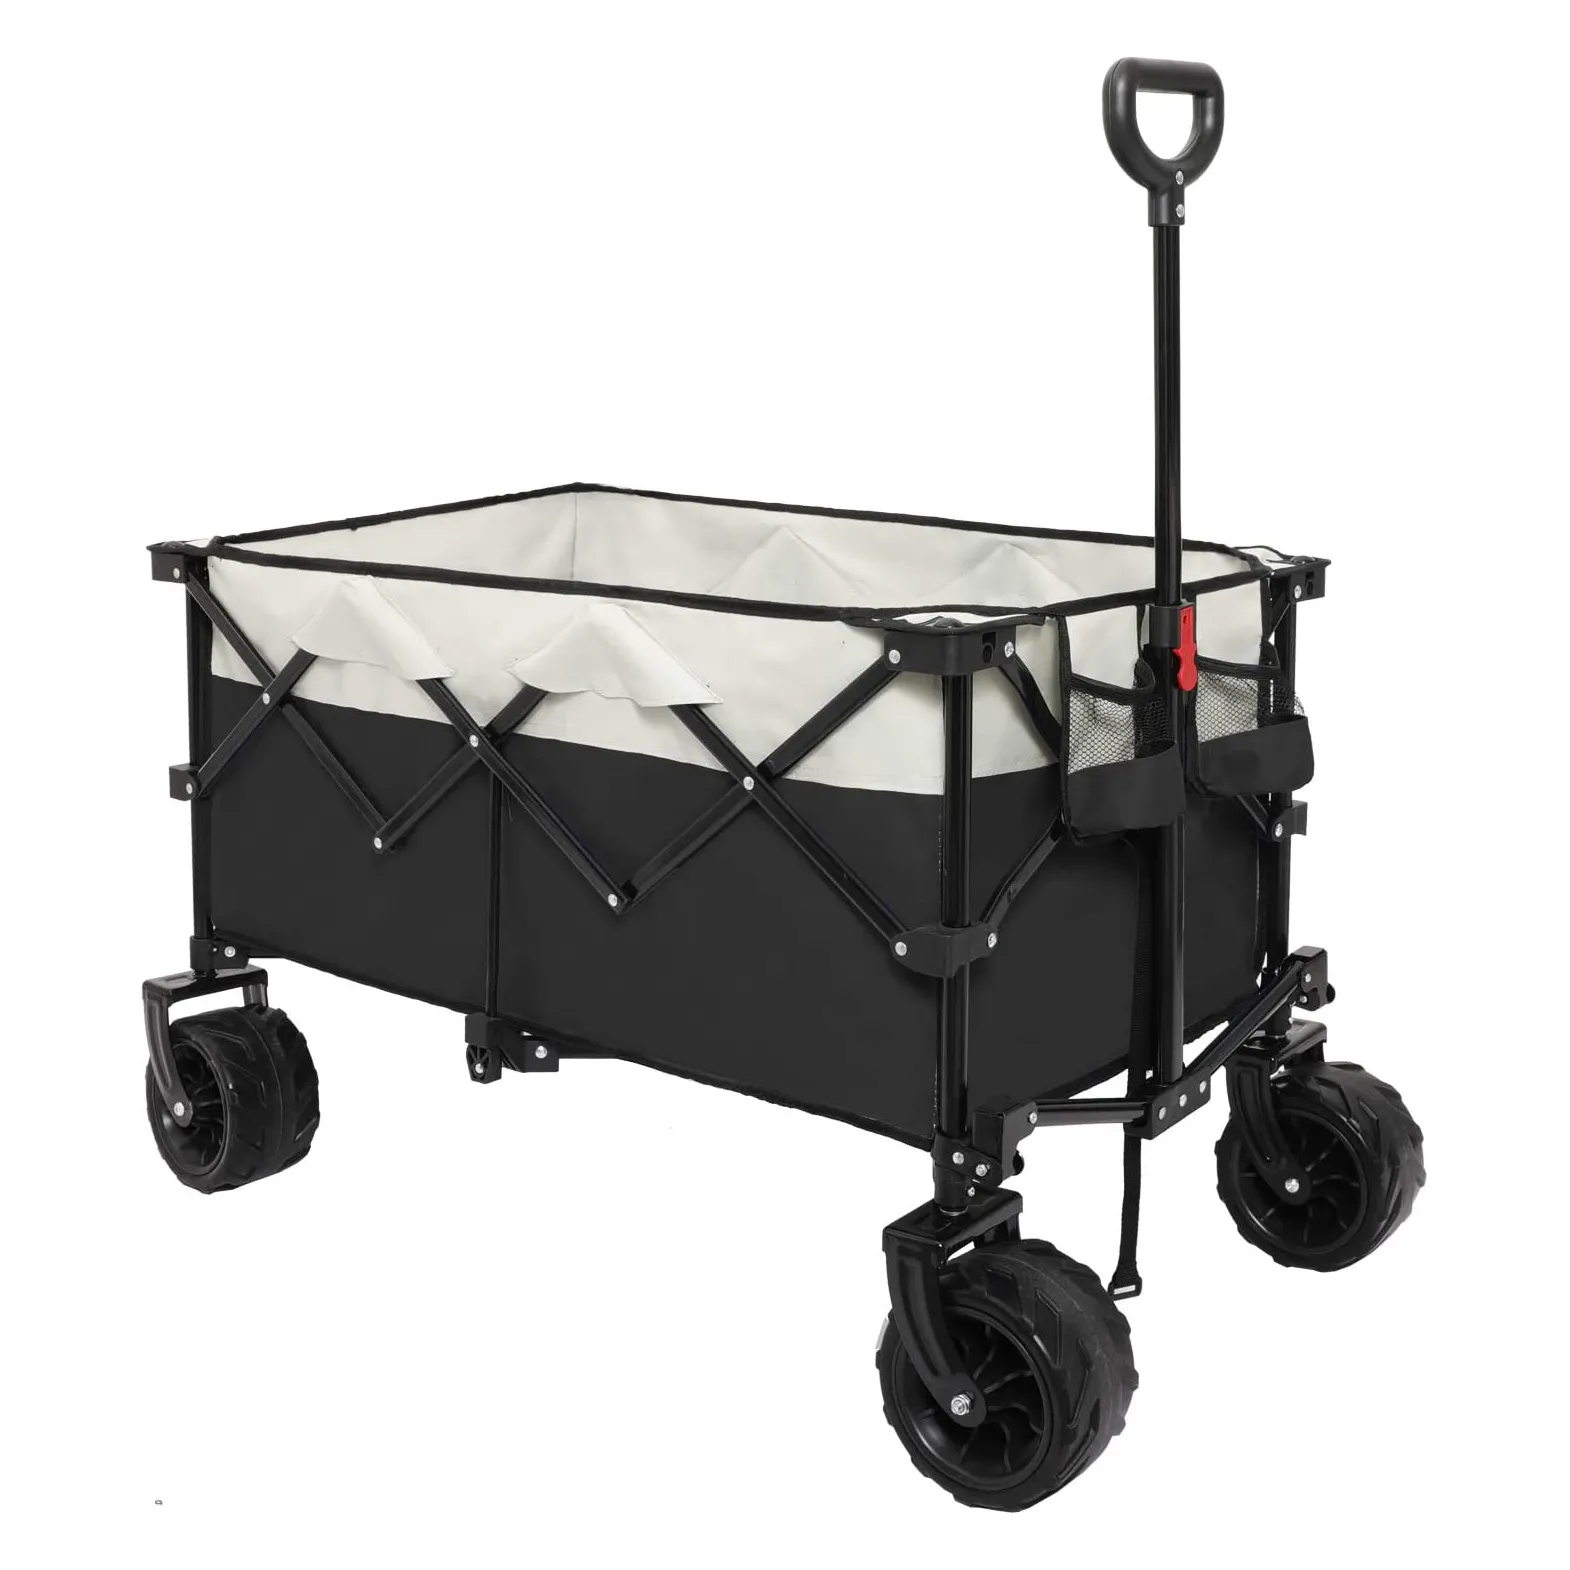 Foldable Collapsible Trolley Outdoor Camping Beach Wagon Cart With Removable Table